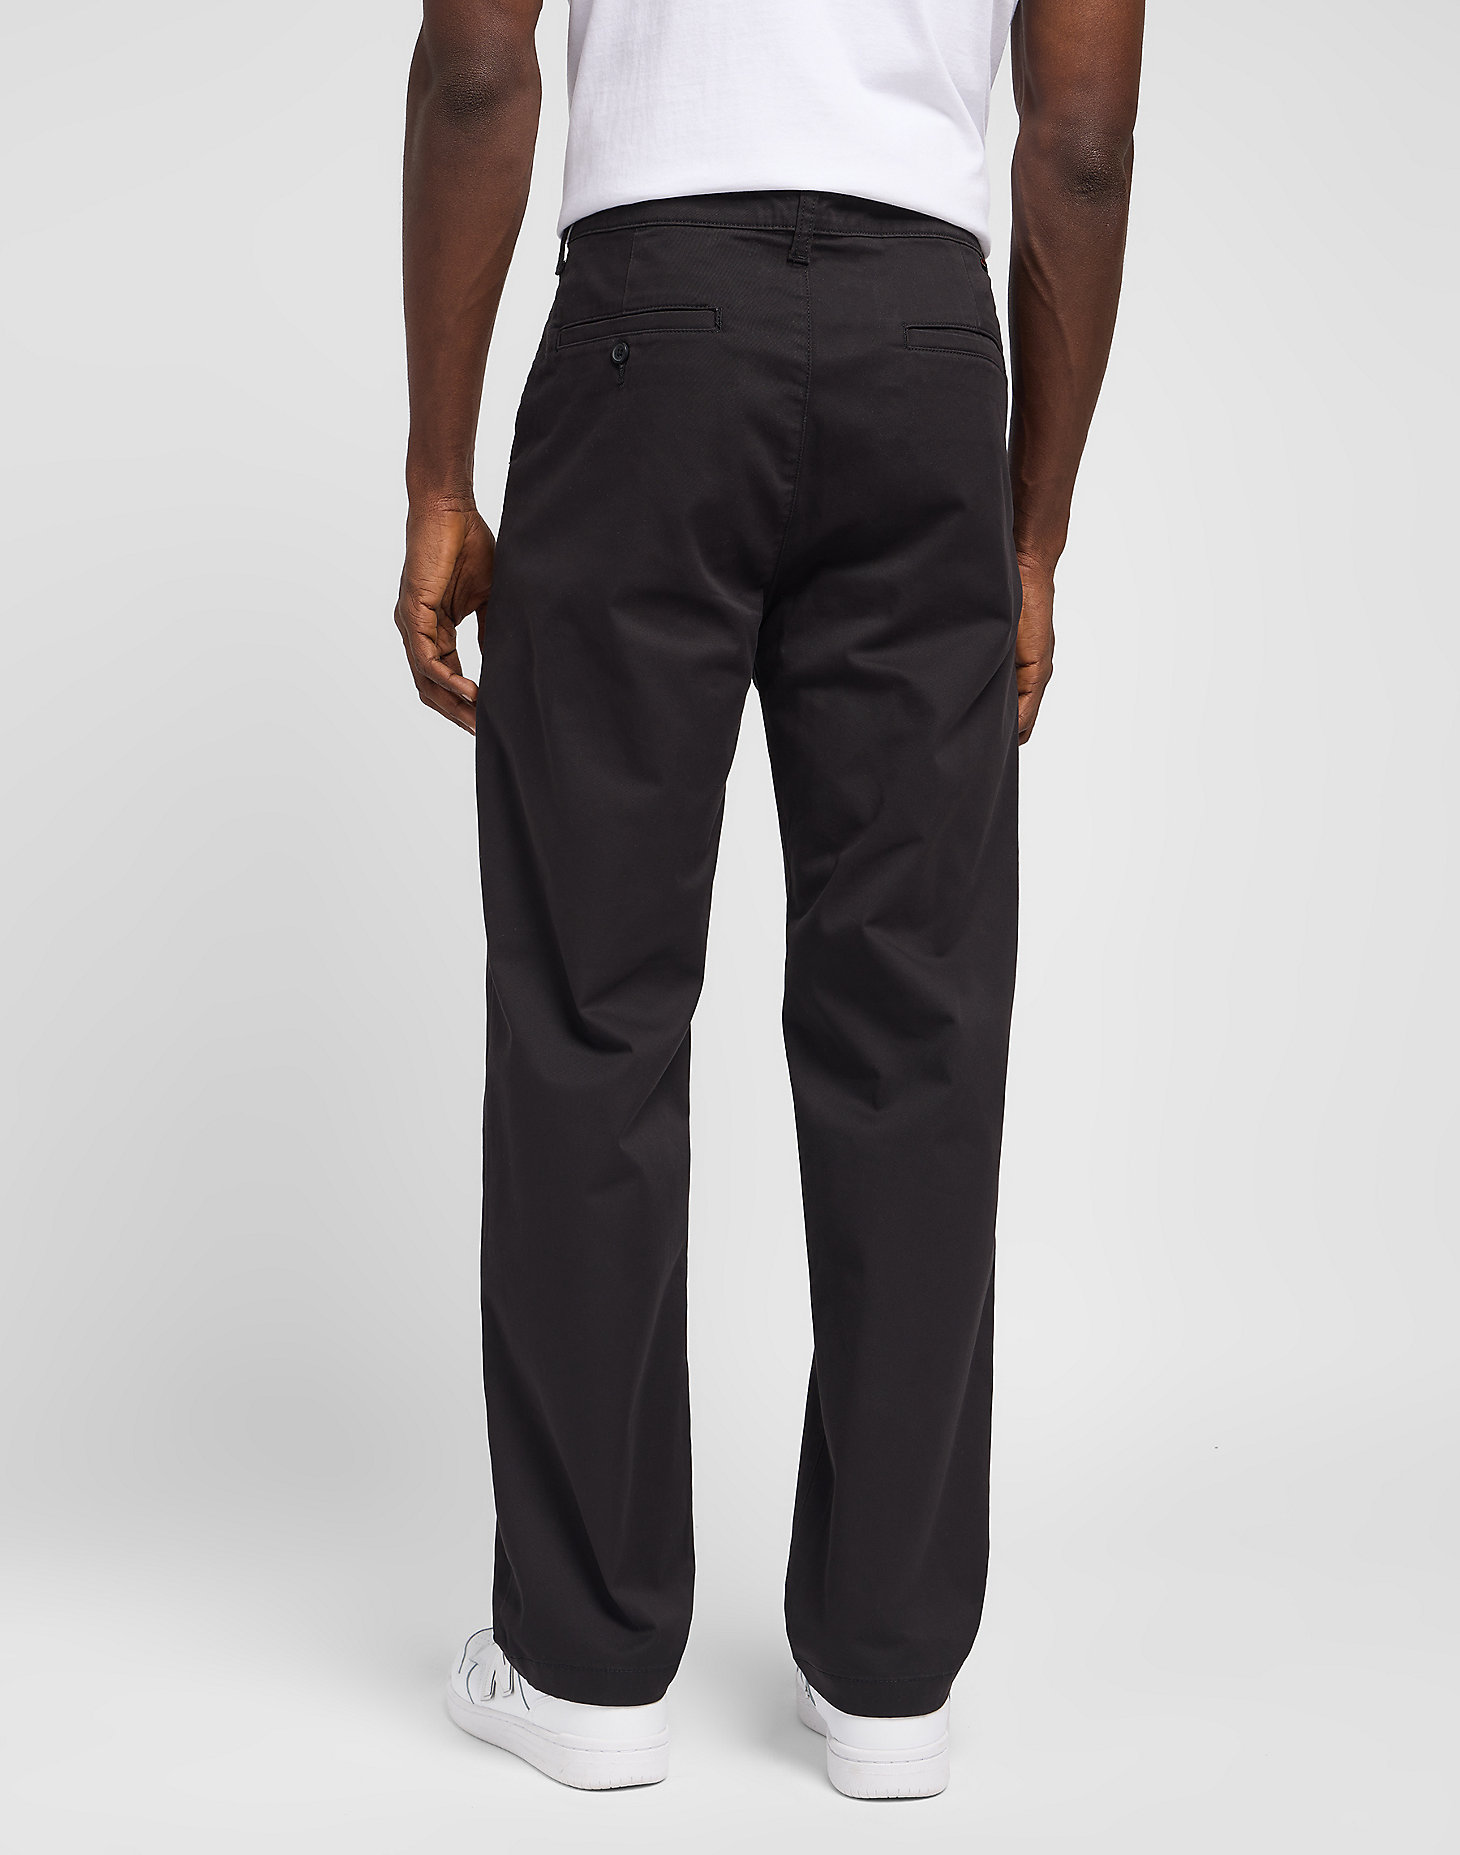 Relaxed Chino in Black alternative view 1